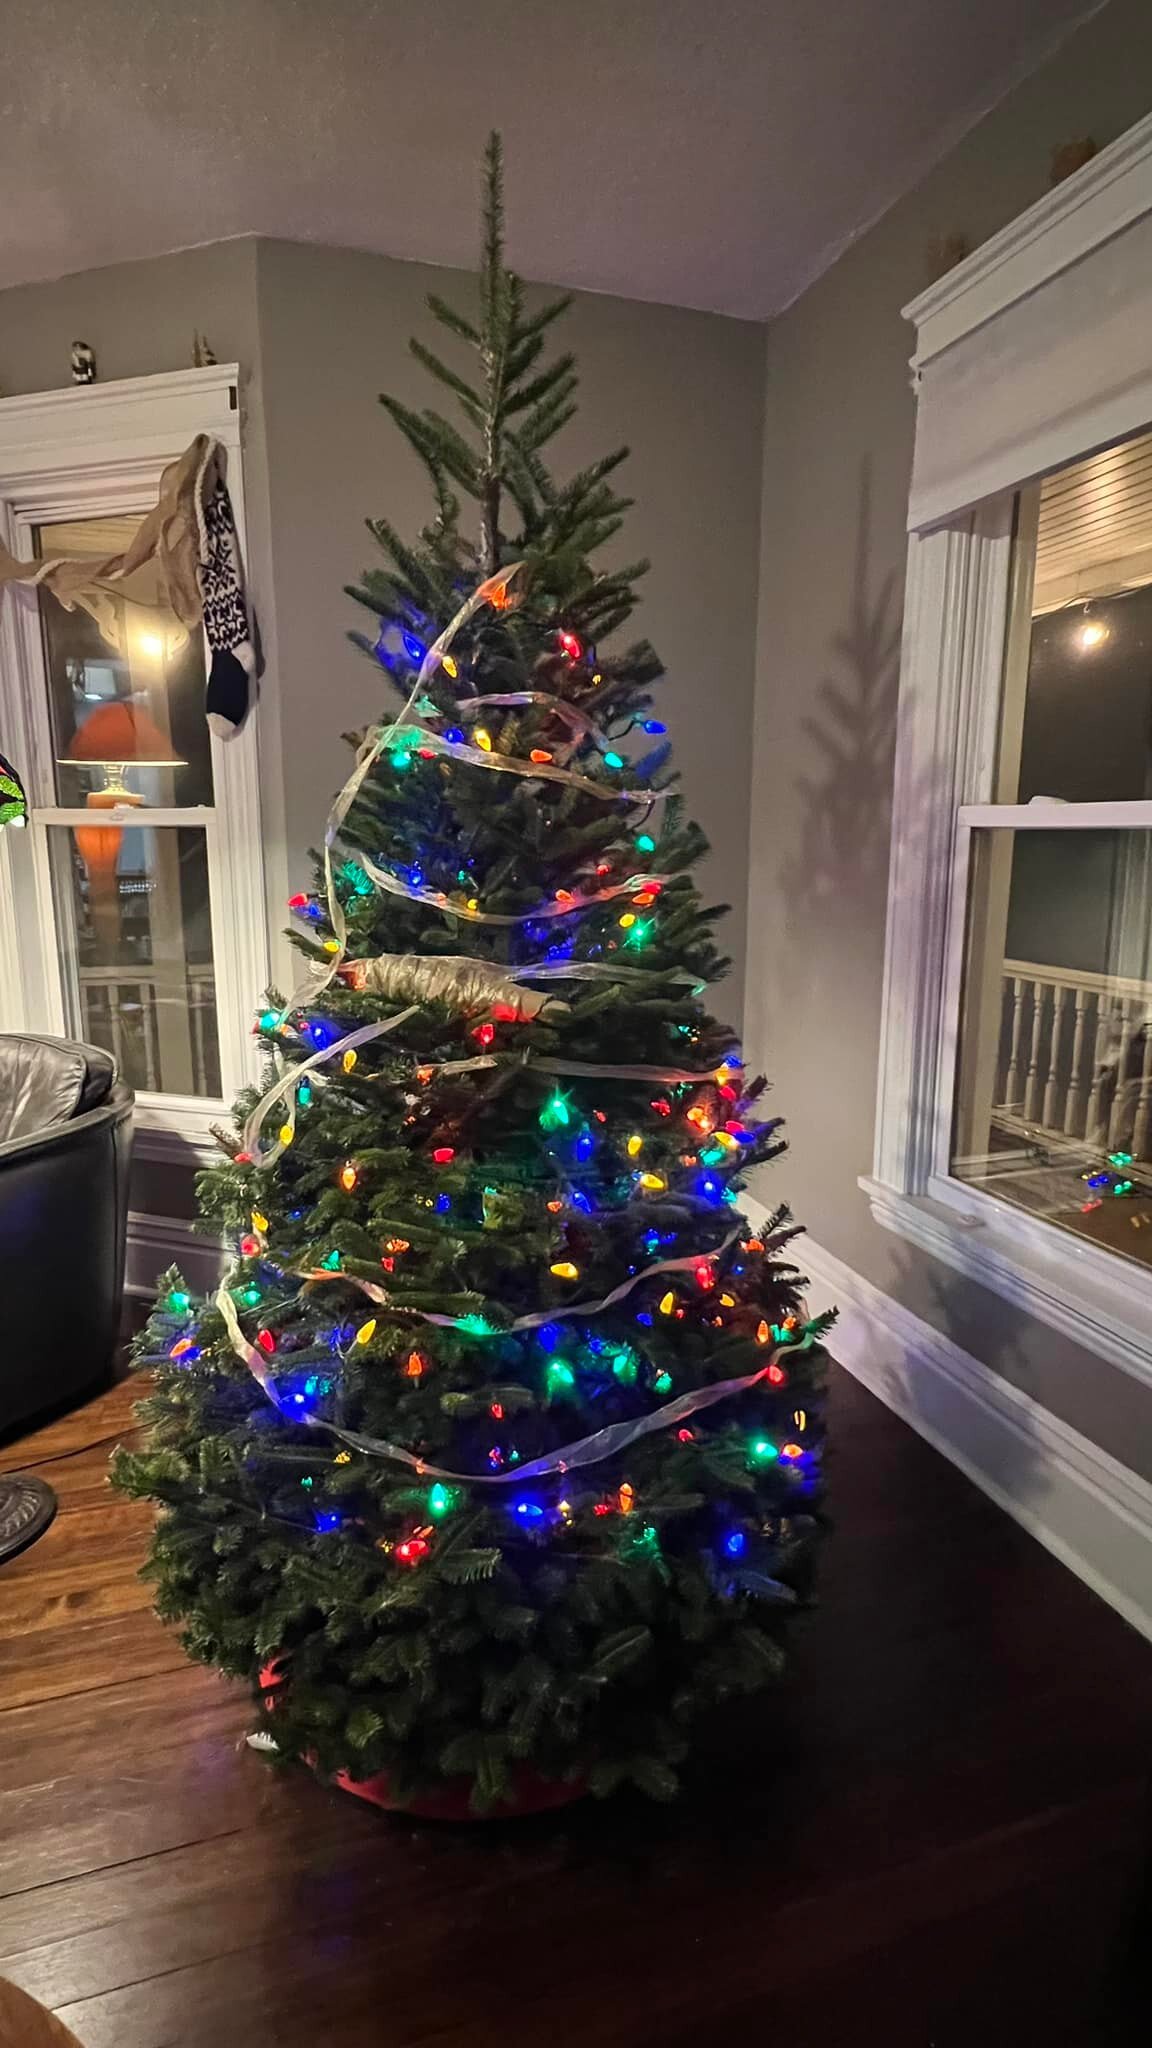 &ldquo;Mom. It took a minute 30 seconds to do the tree!&rdquo;